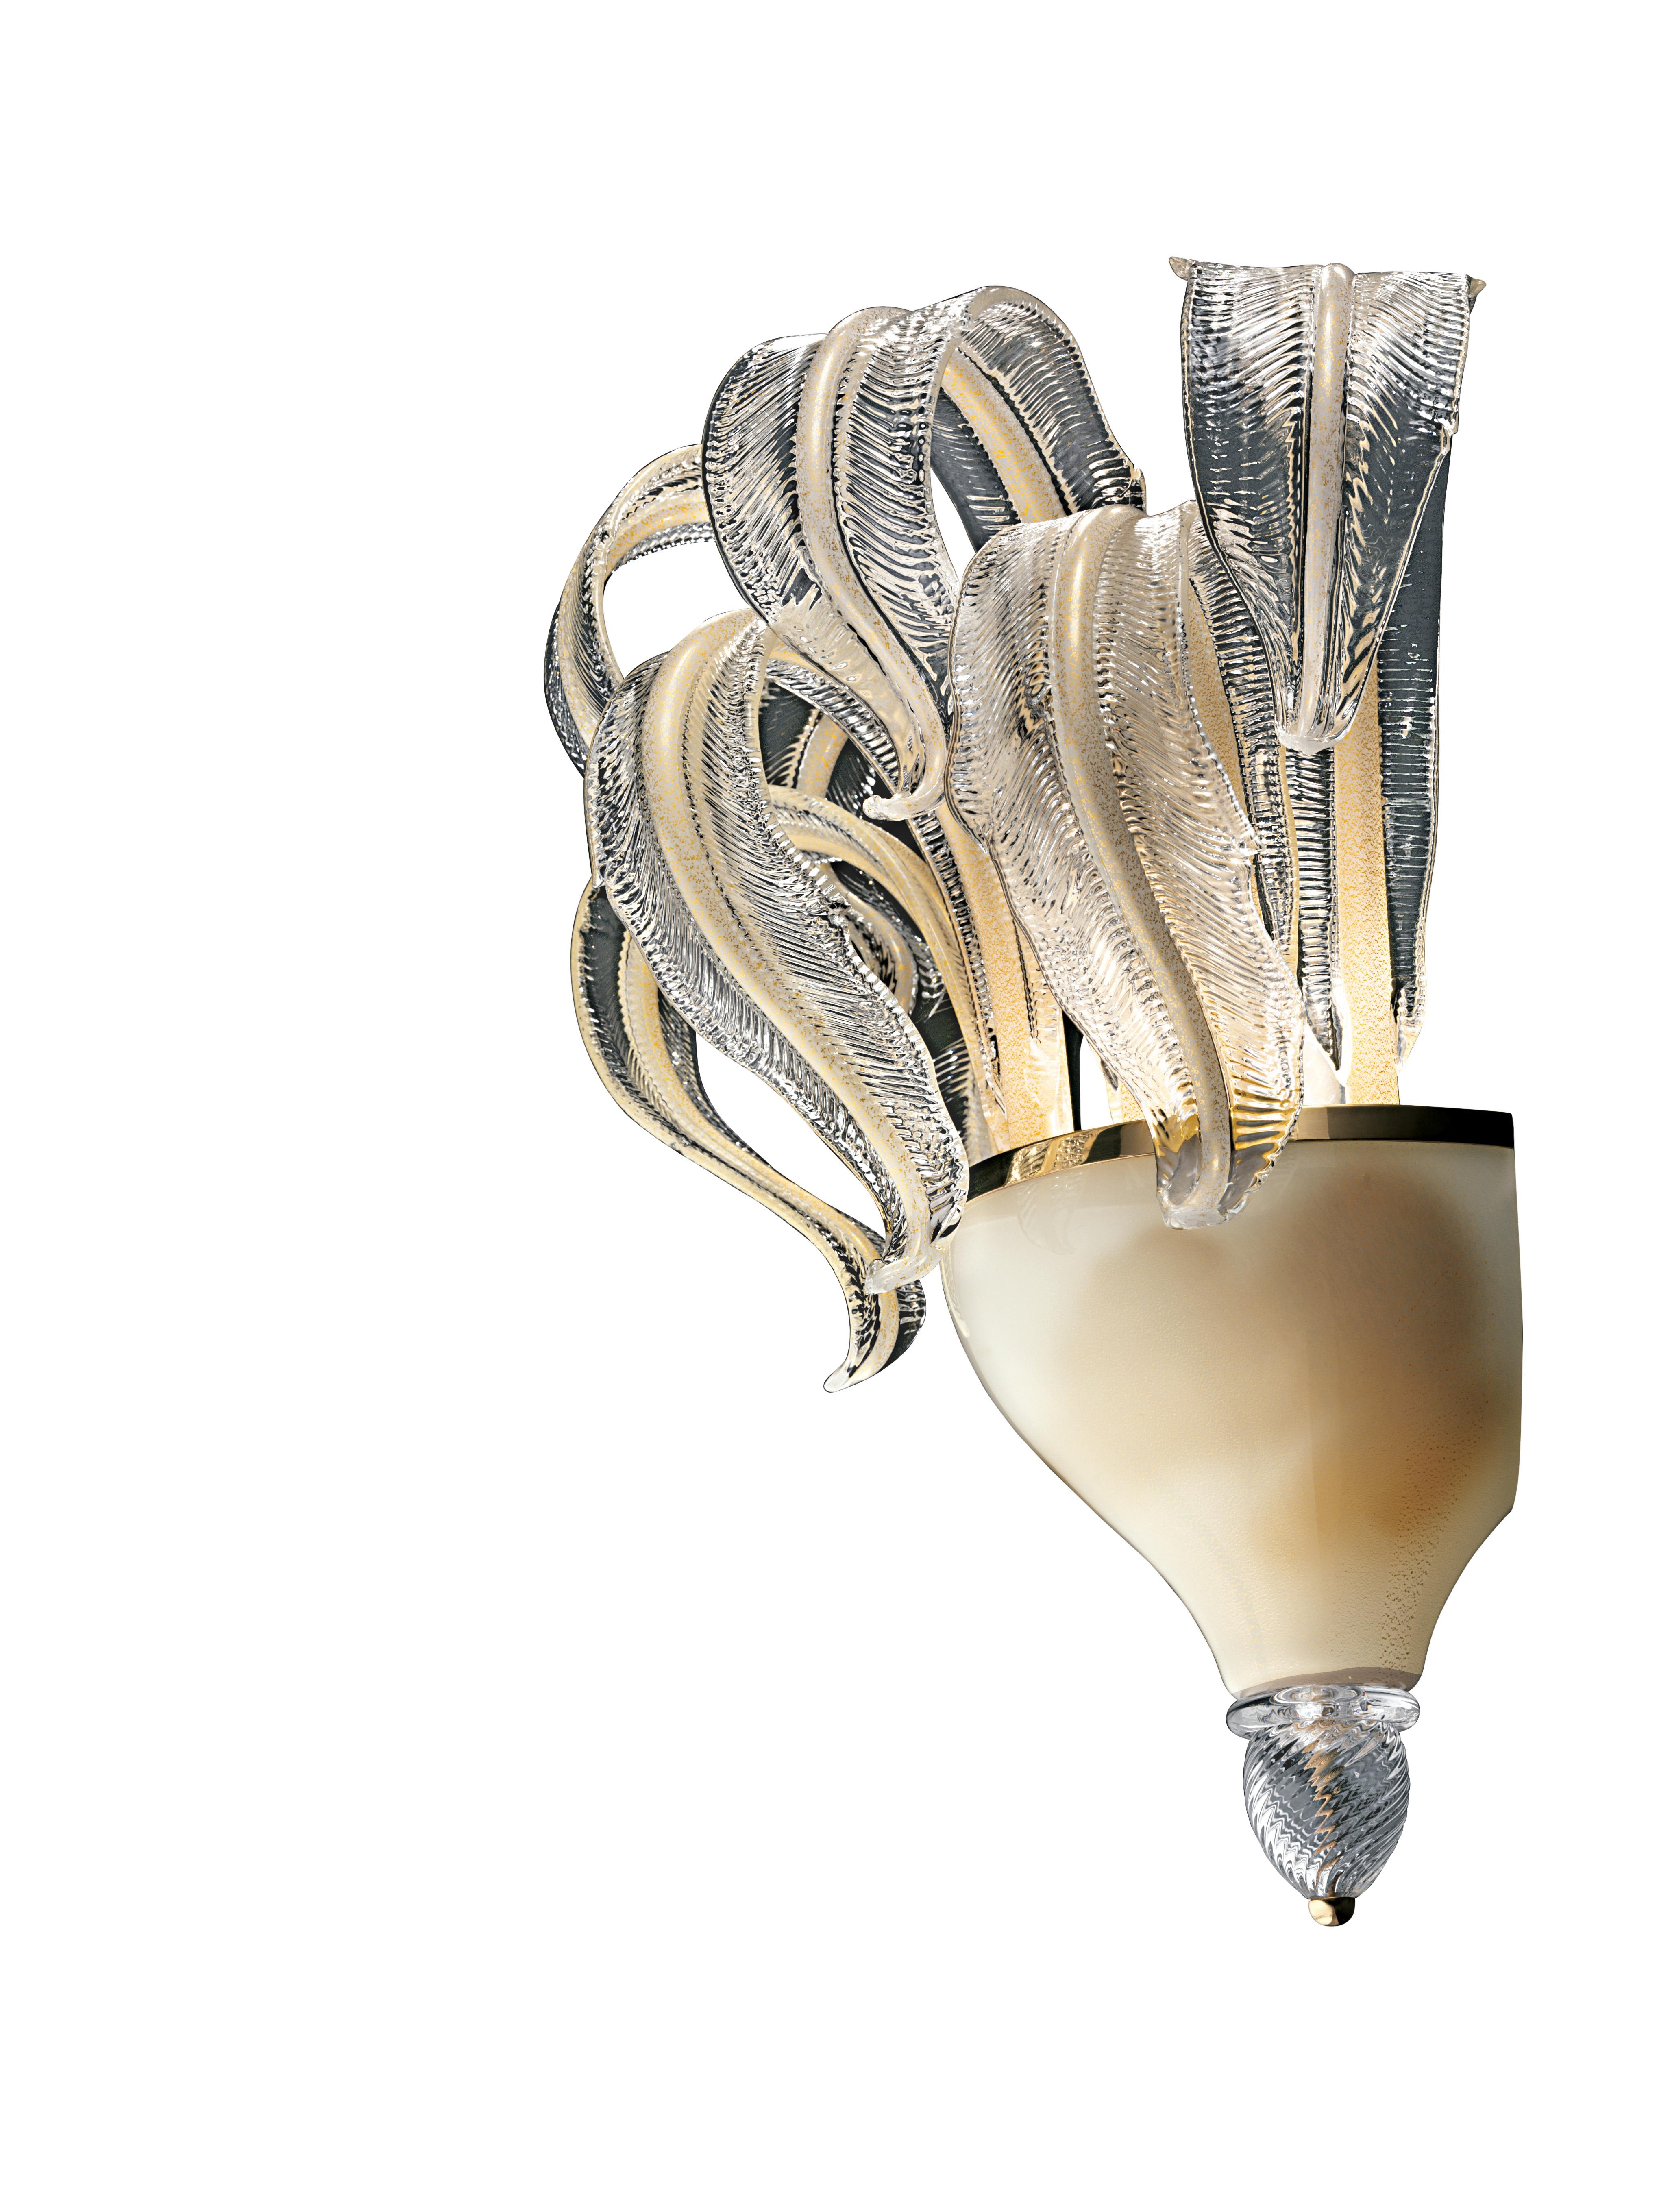 Piume 5391 Wall Sconce in Beige Gold Glass, by Barovier&Toso